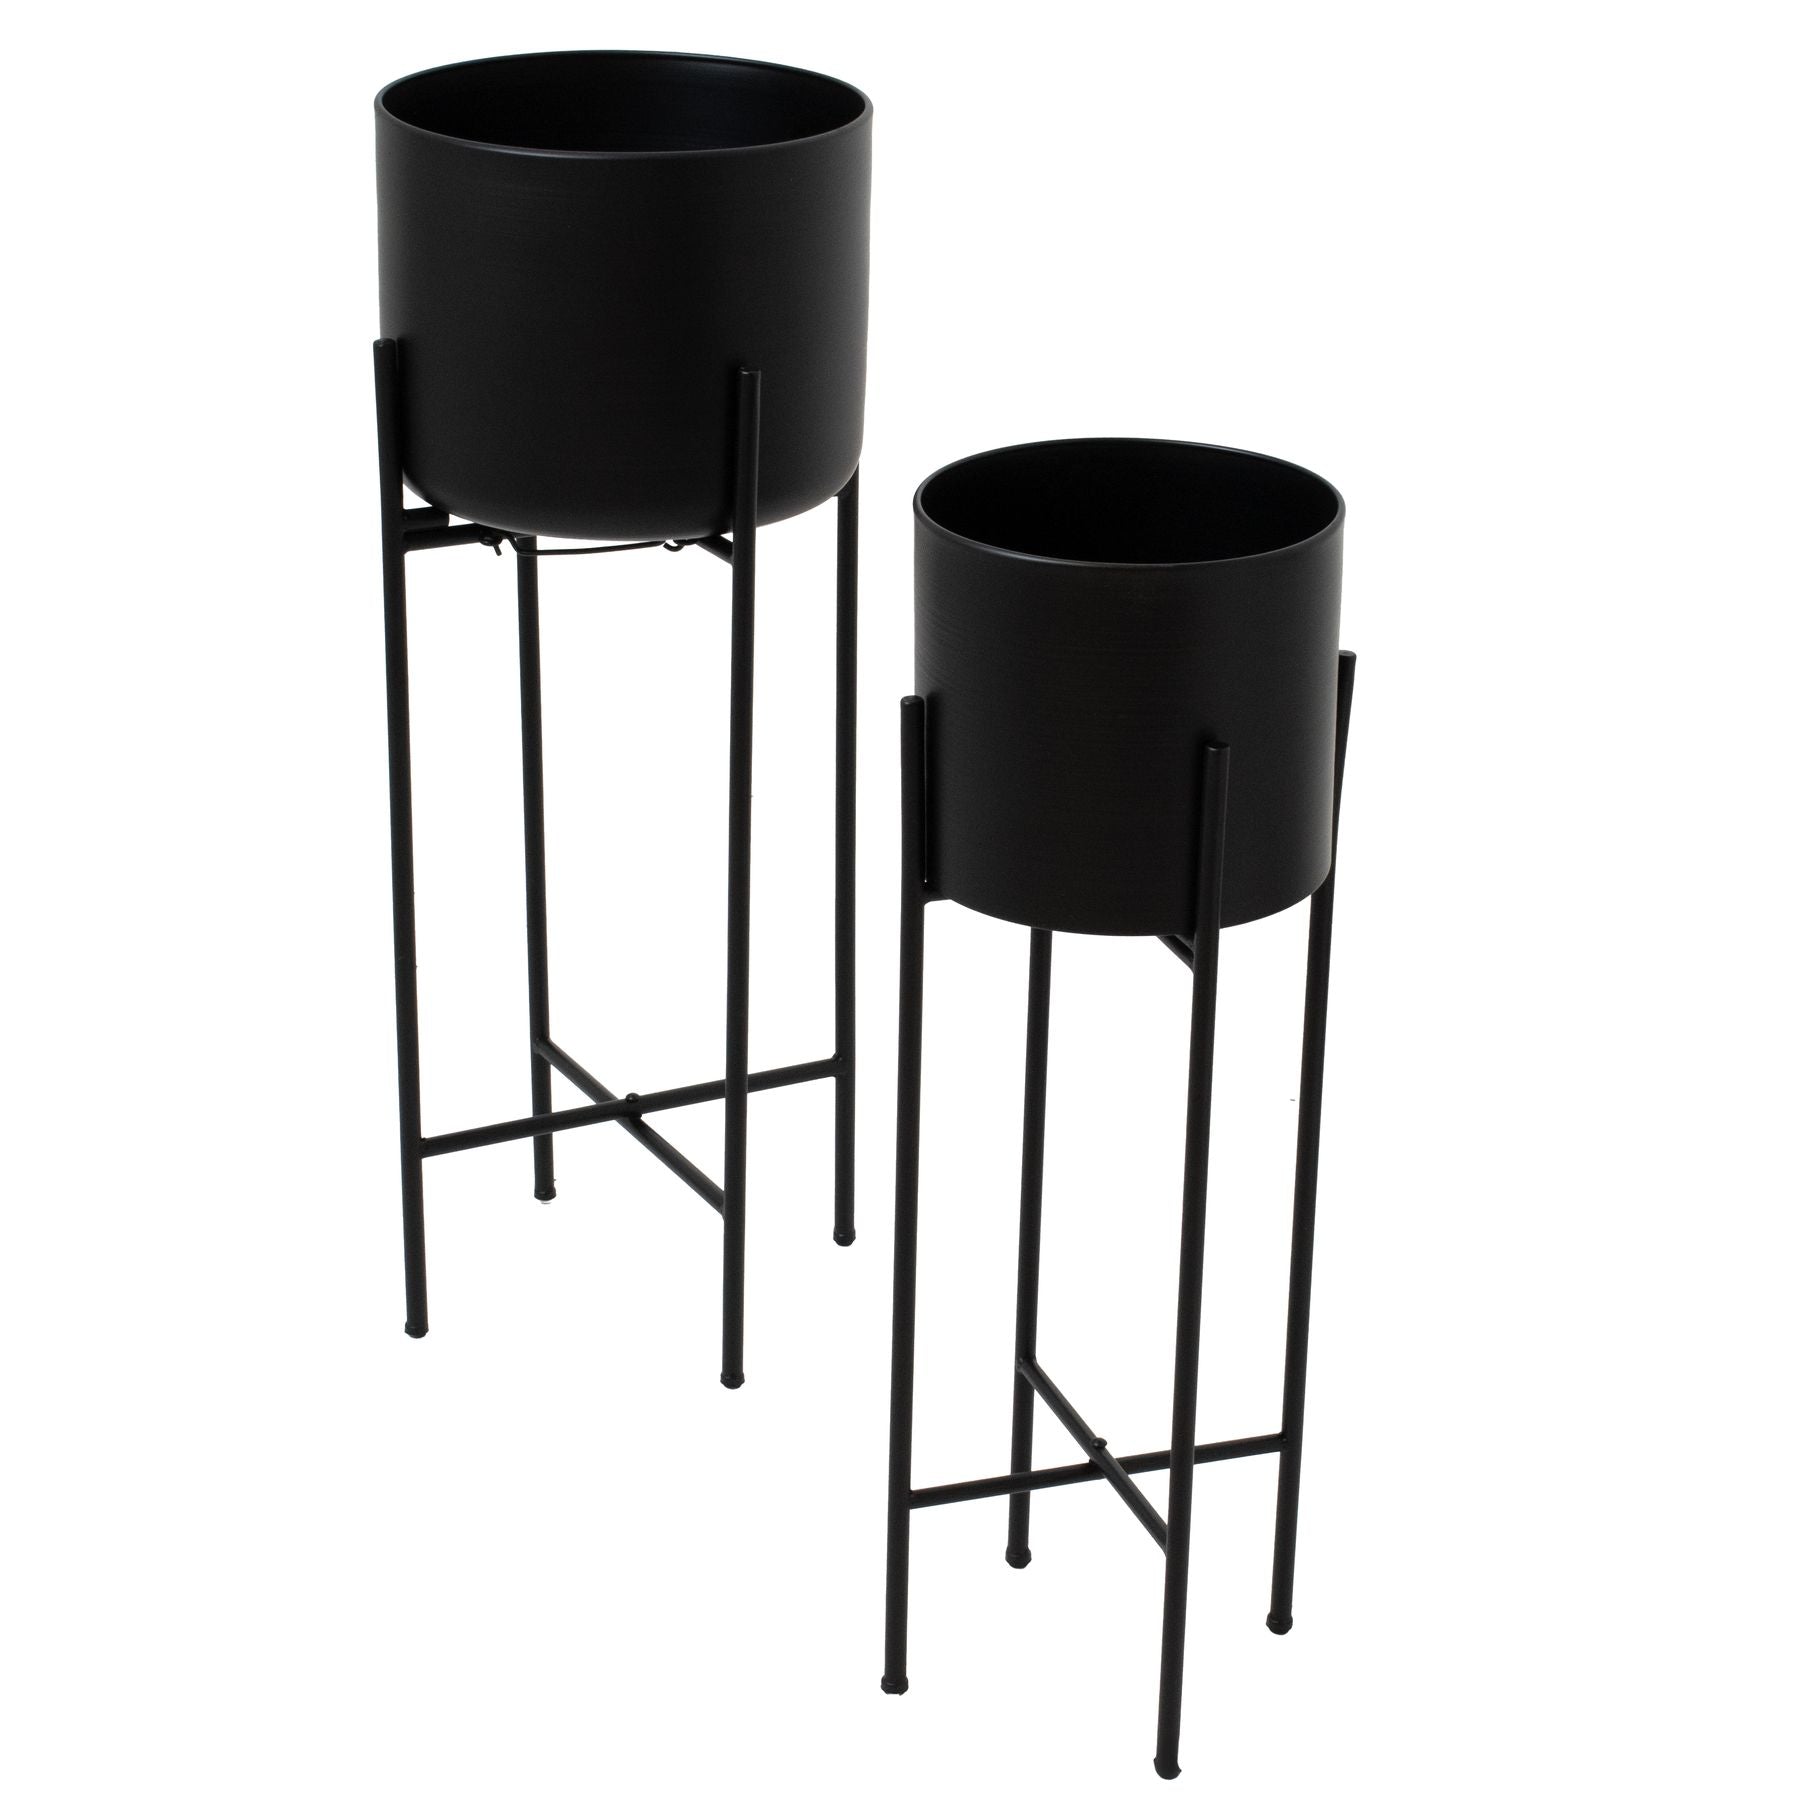 View Set Of Two Matt Black Planters On Stand information